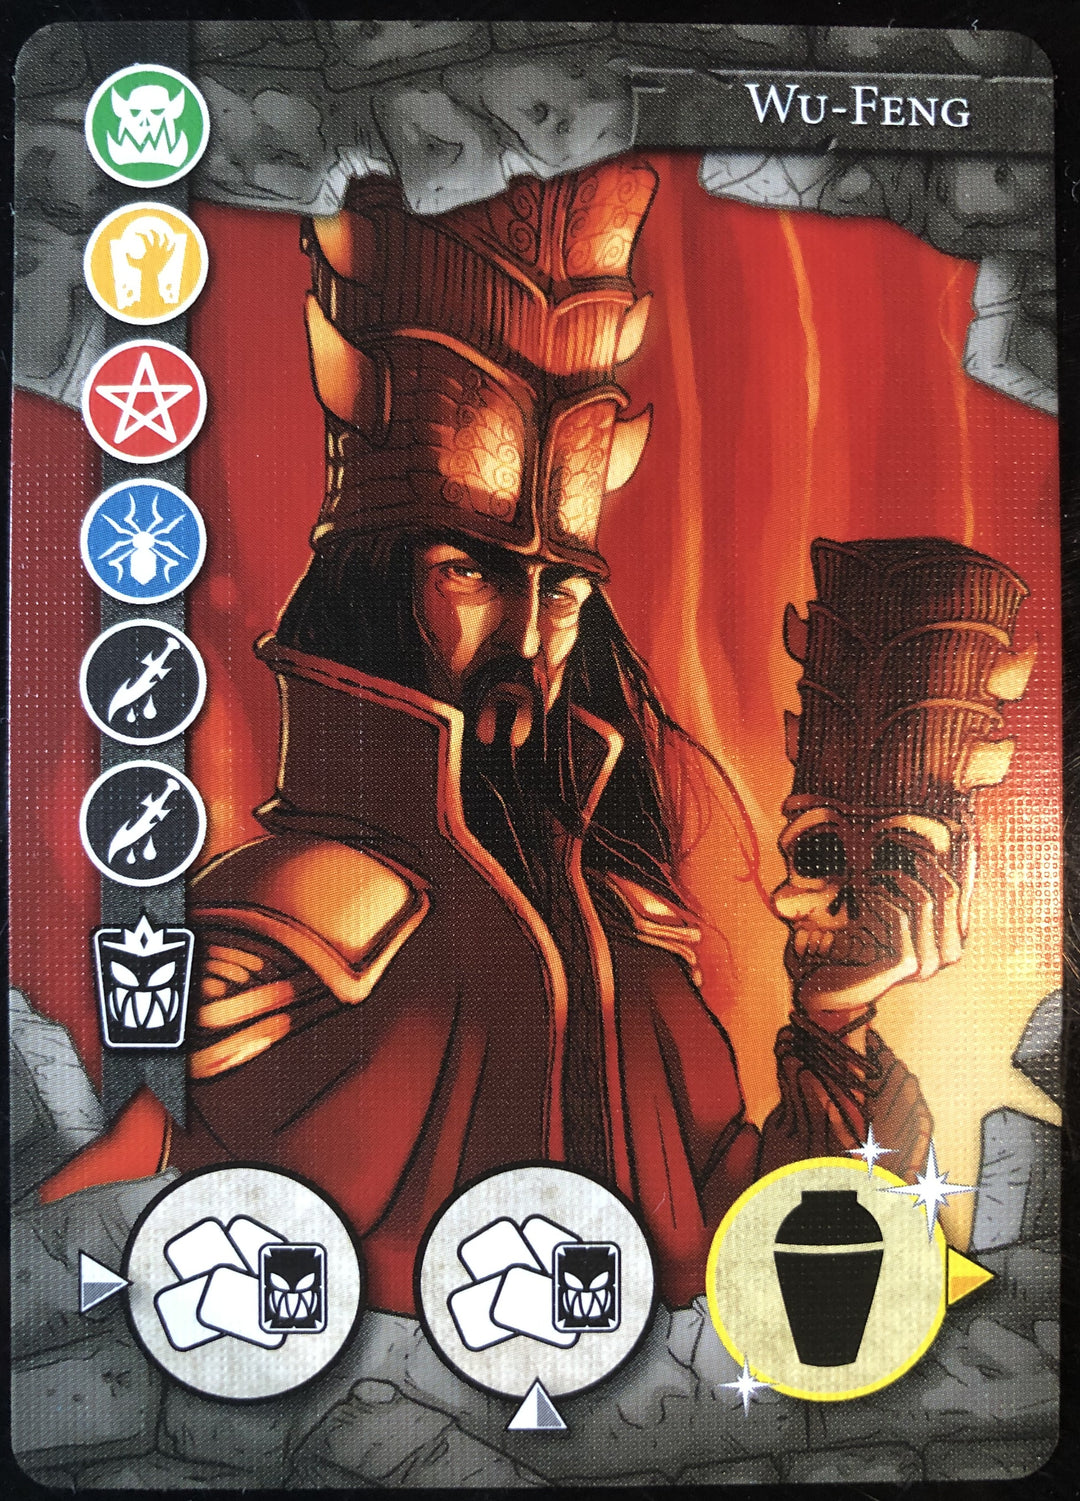 Last Bastion - Wu-Feng promo card for use with the board game L, Last Bastion, Spring Sale, sold at the BoardGameGeek Store